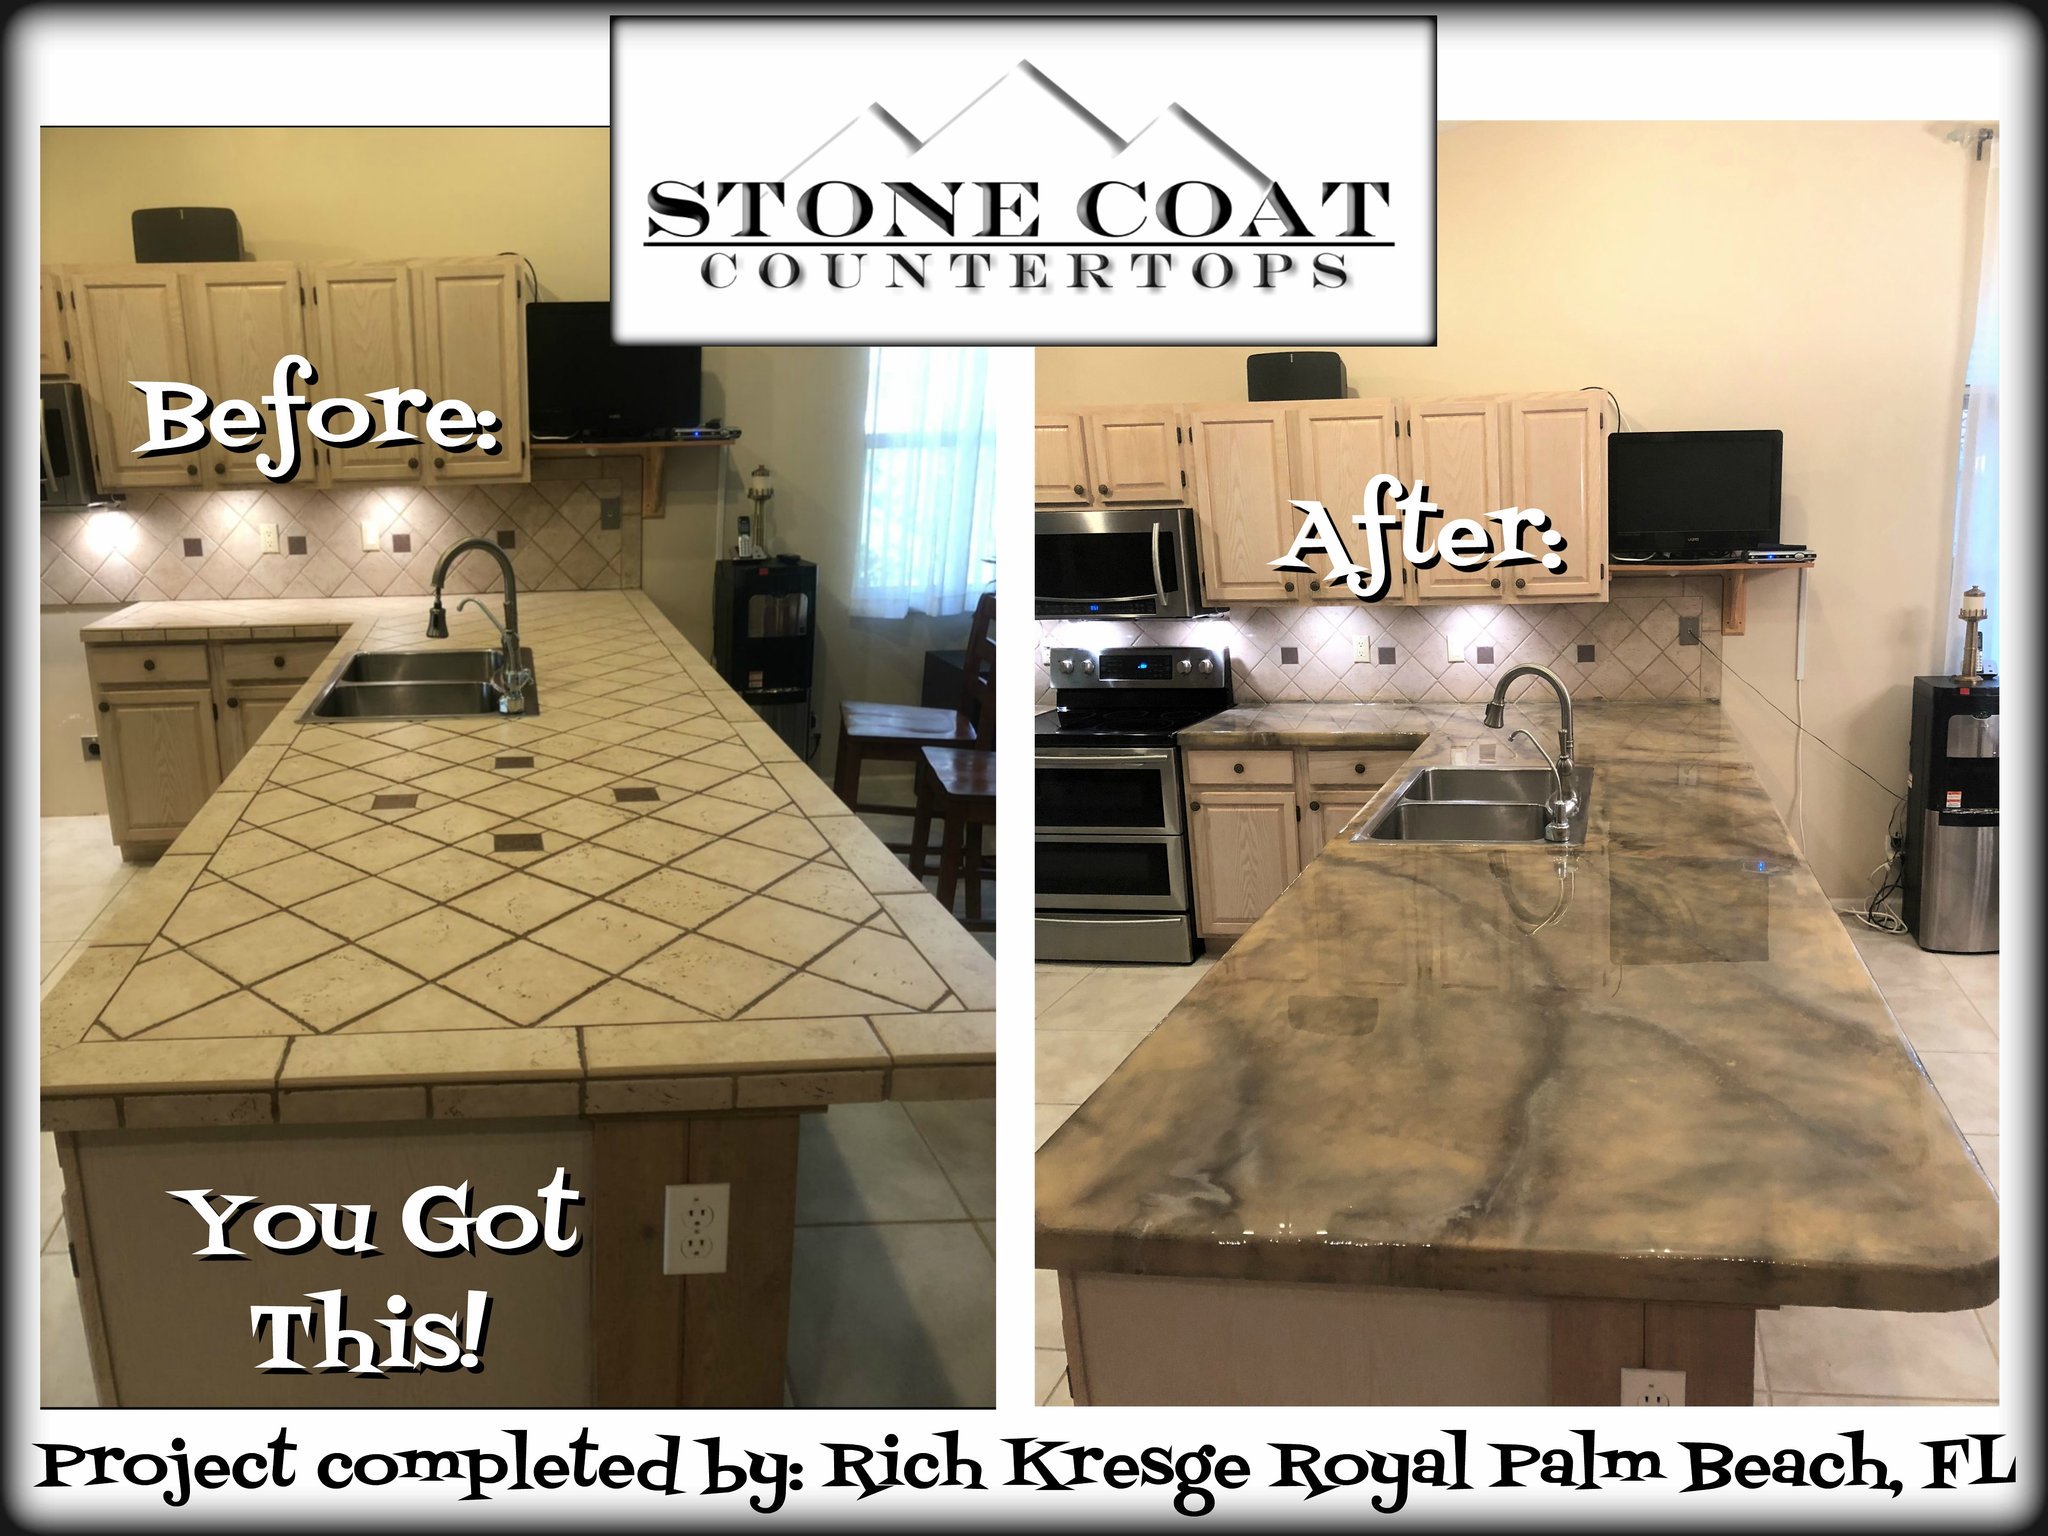 stonecoatcountertops on X: We wanted to share this outstanding tile  countertop transformation using Stone Coat Countertop Epoxy. What a great  change and no more grout lines!! #stonecoatcountertops #epoxy  #epoxycountertops #tiletransformation #diyepoxy